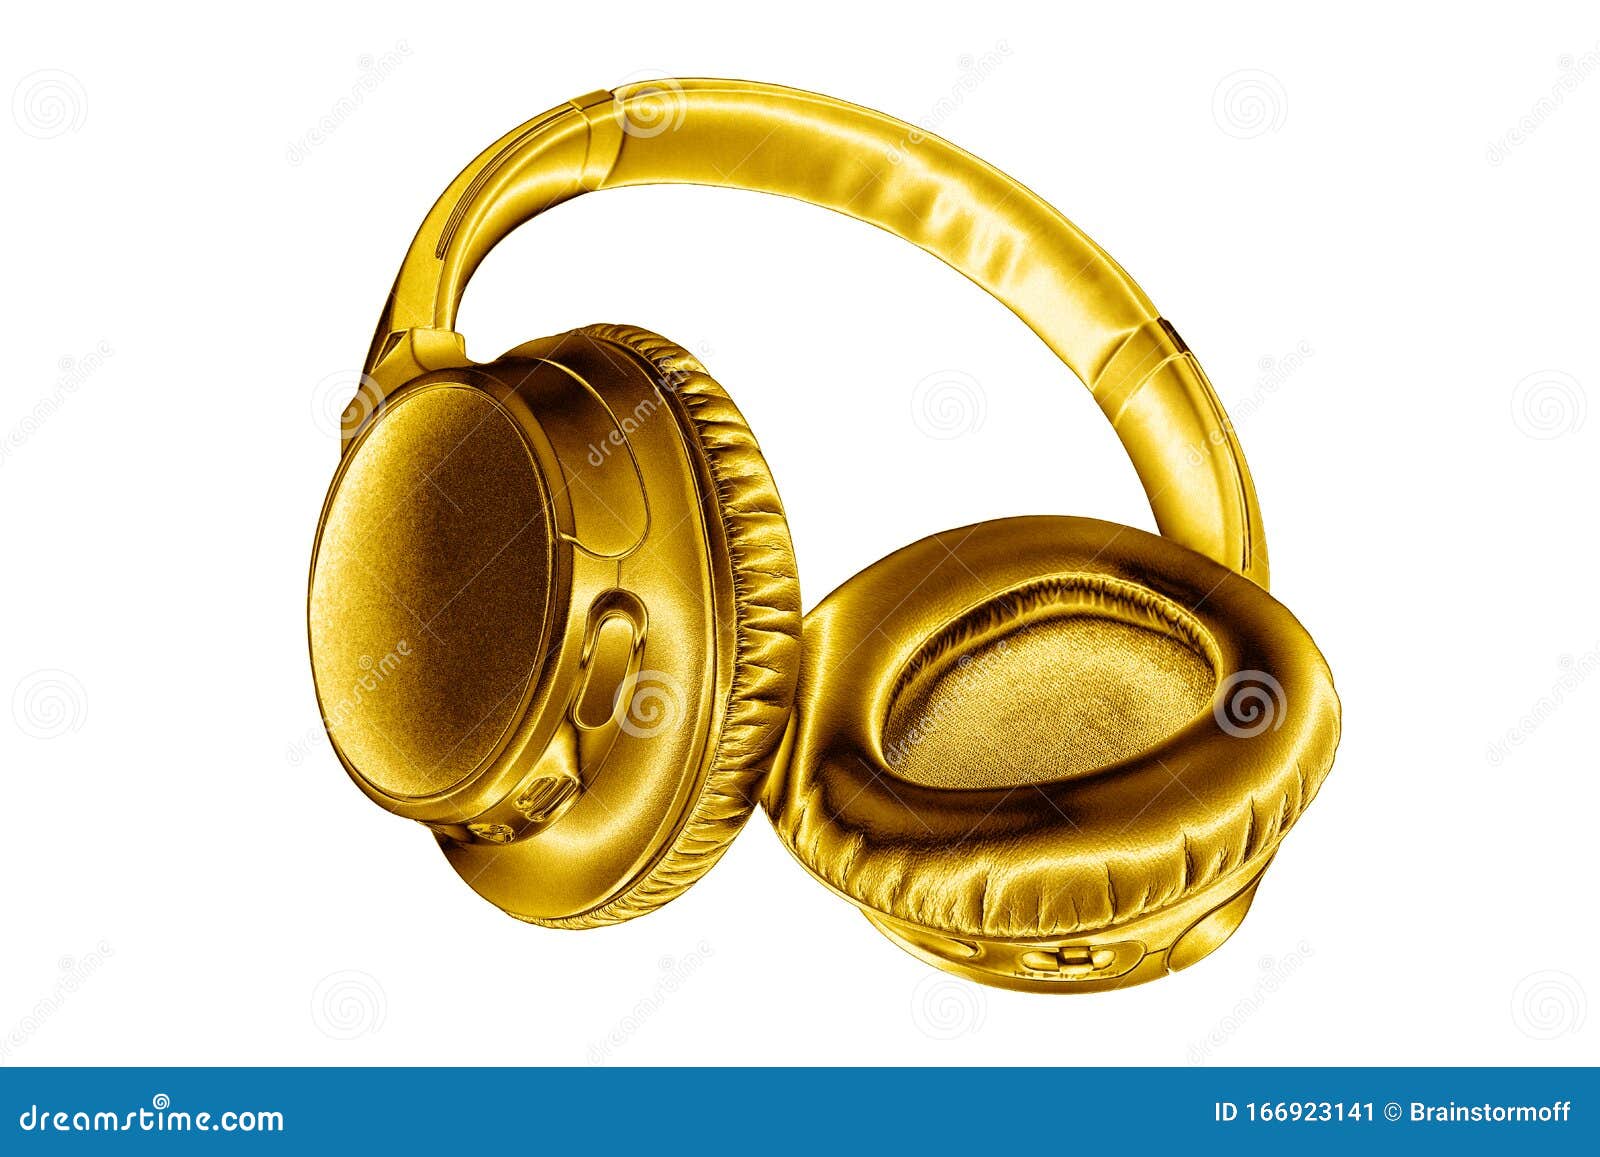 Golden Shiny Wireless Headphones On White Background Isolated Close Up Luxury Gold Metal Bluetooth Headset Yellow Earphones Stock Image Image Of Element Gadget 166923141